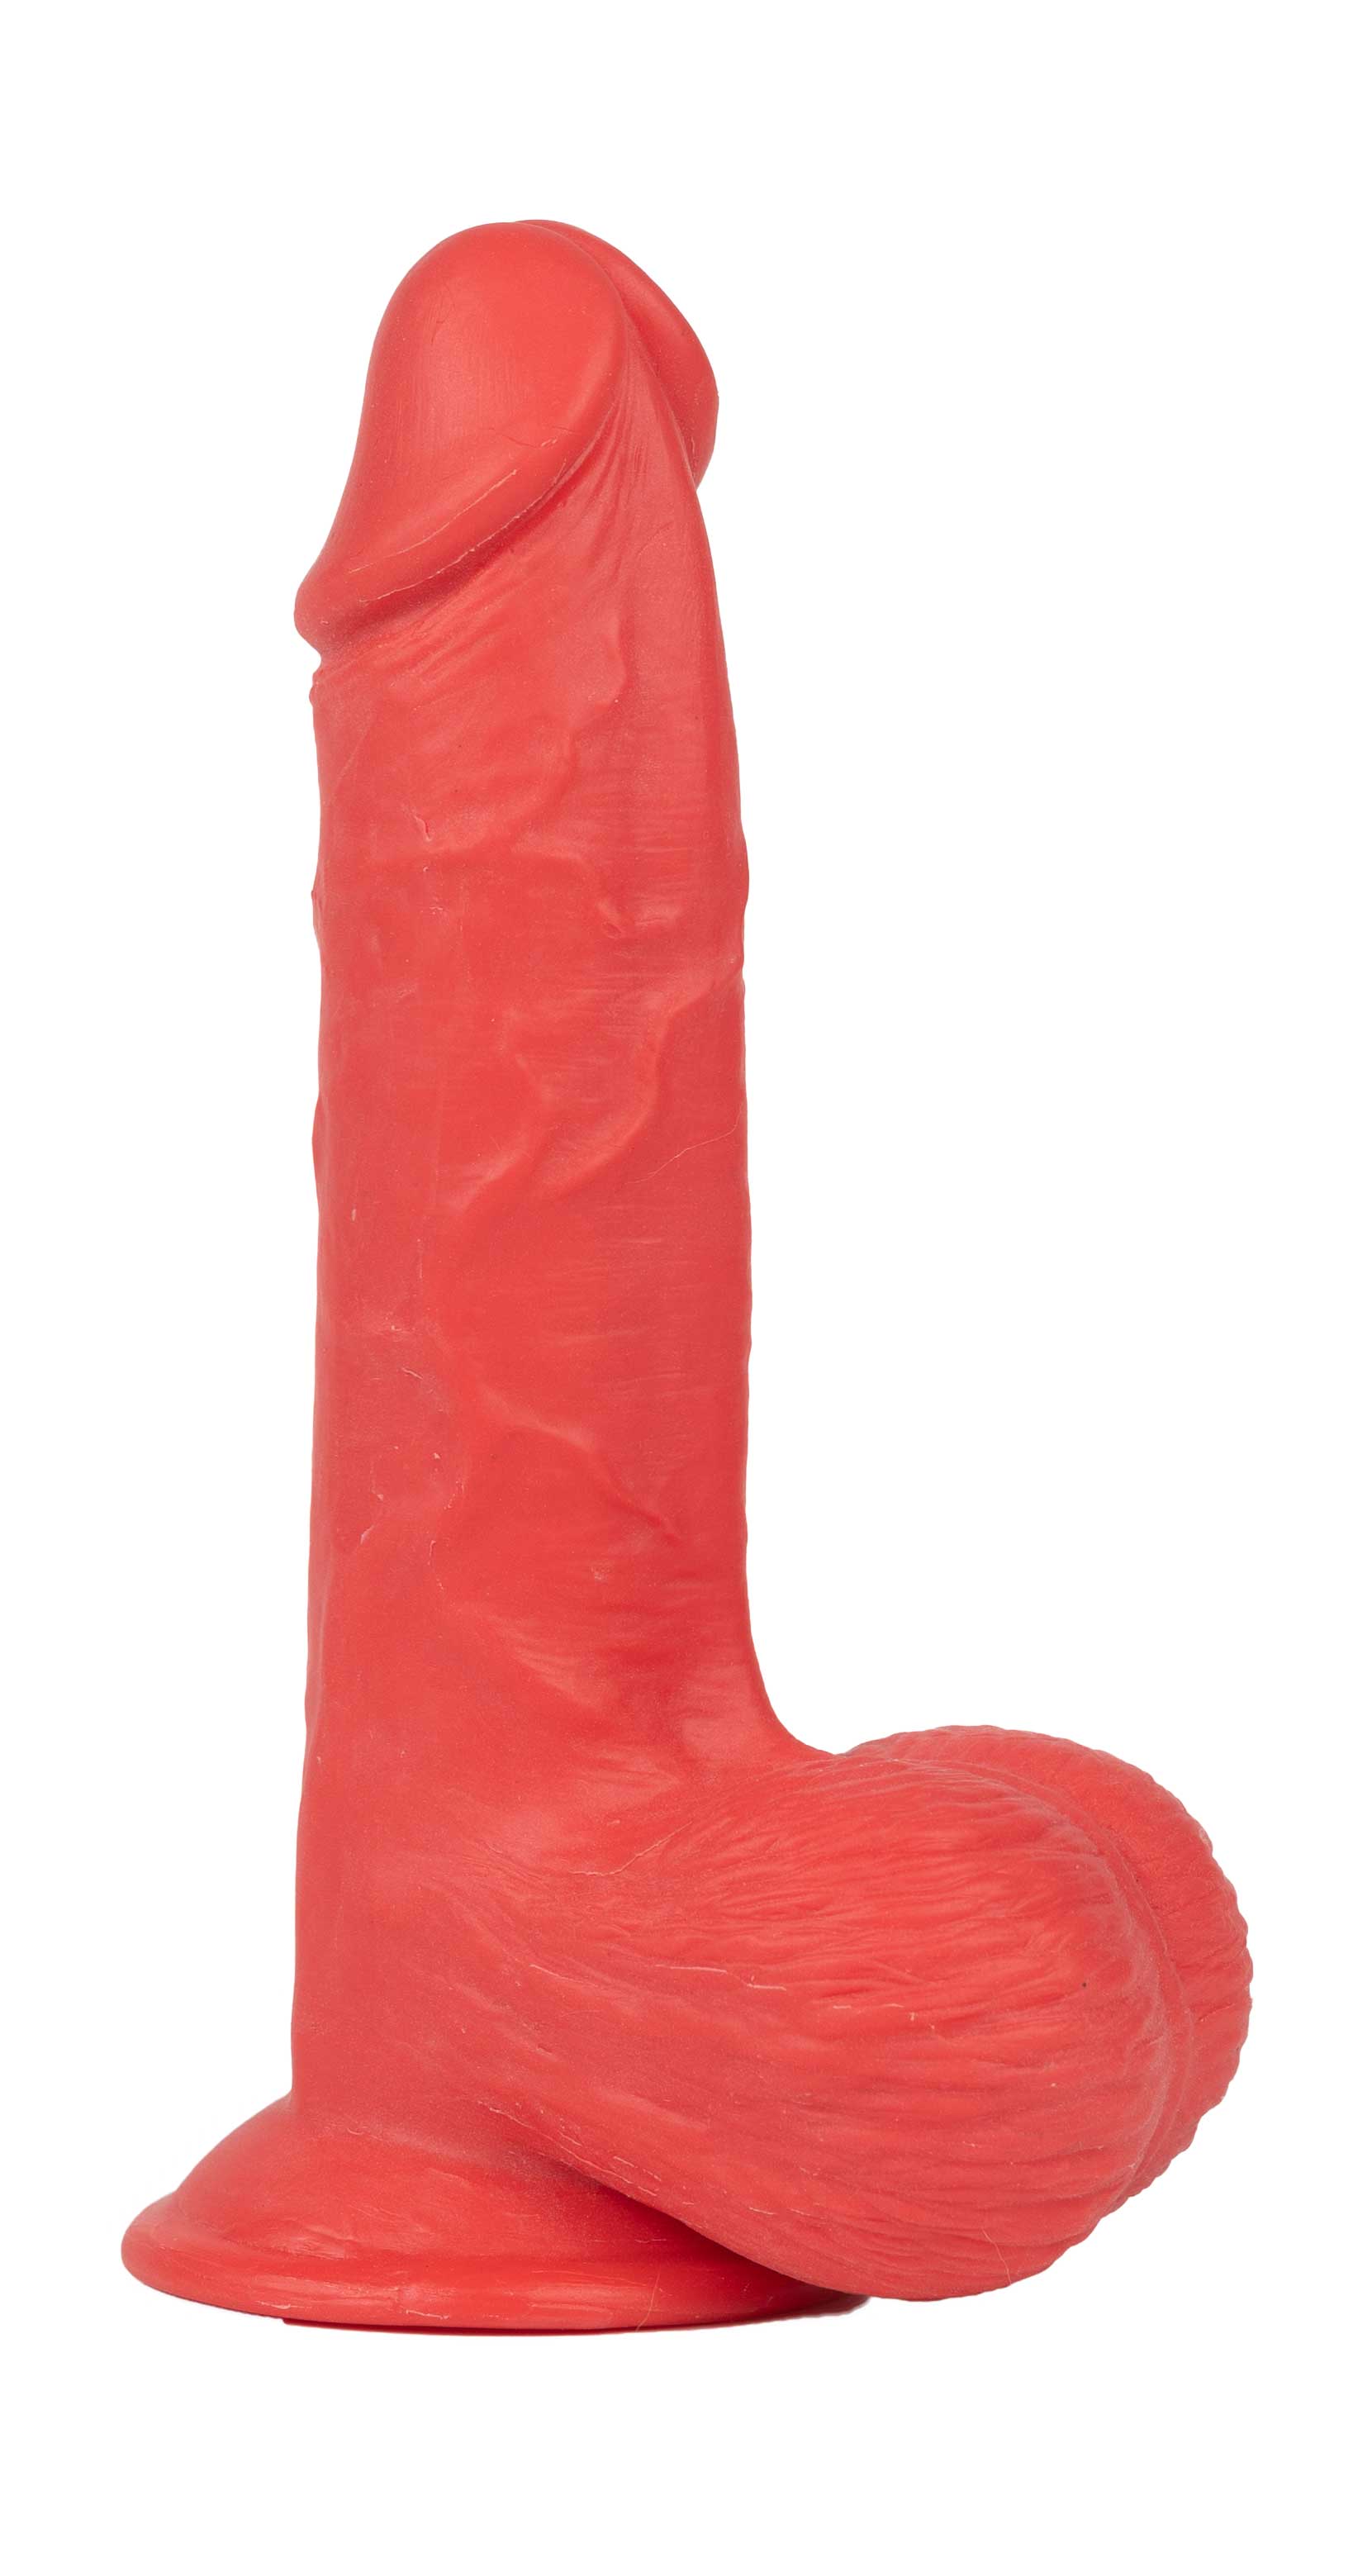 Get Lucky Ms. Ruby 7.5 Inch Dildo - Red-4